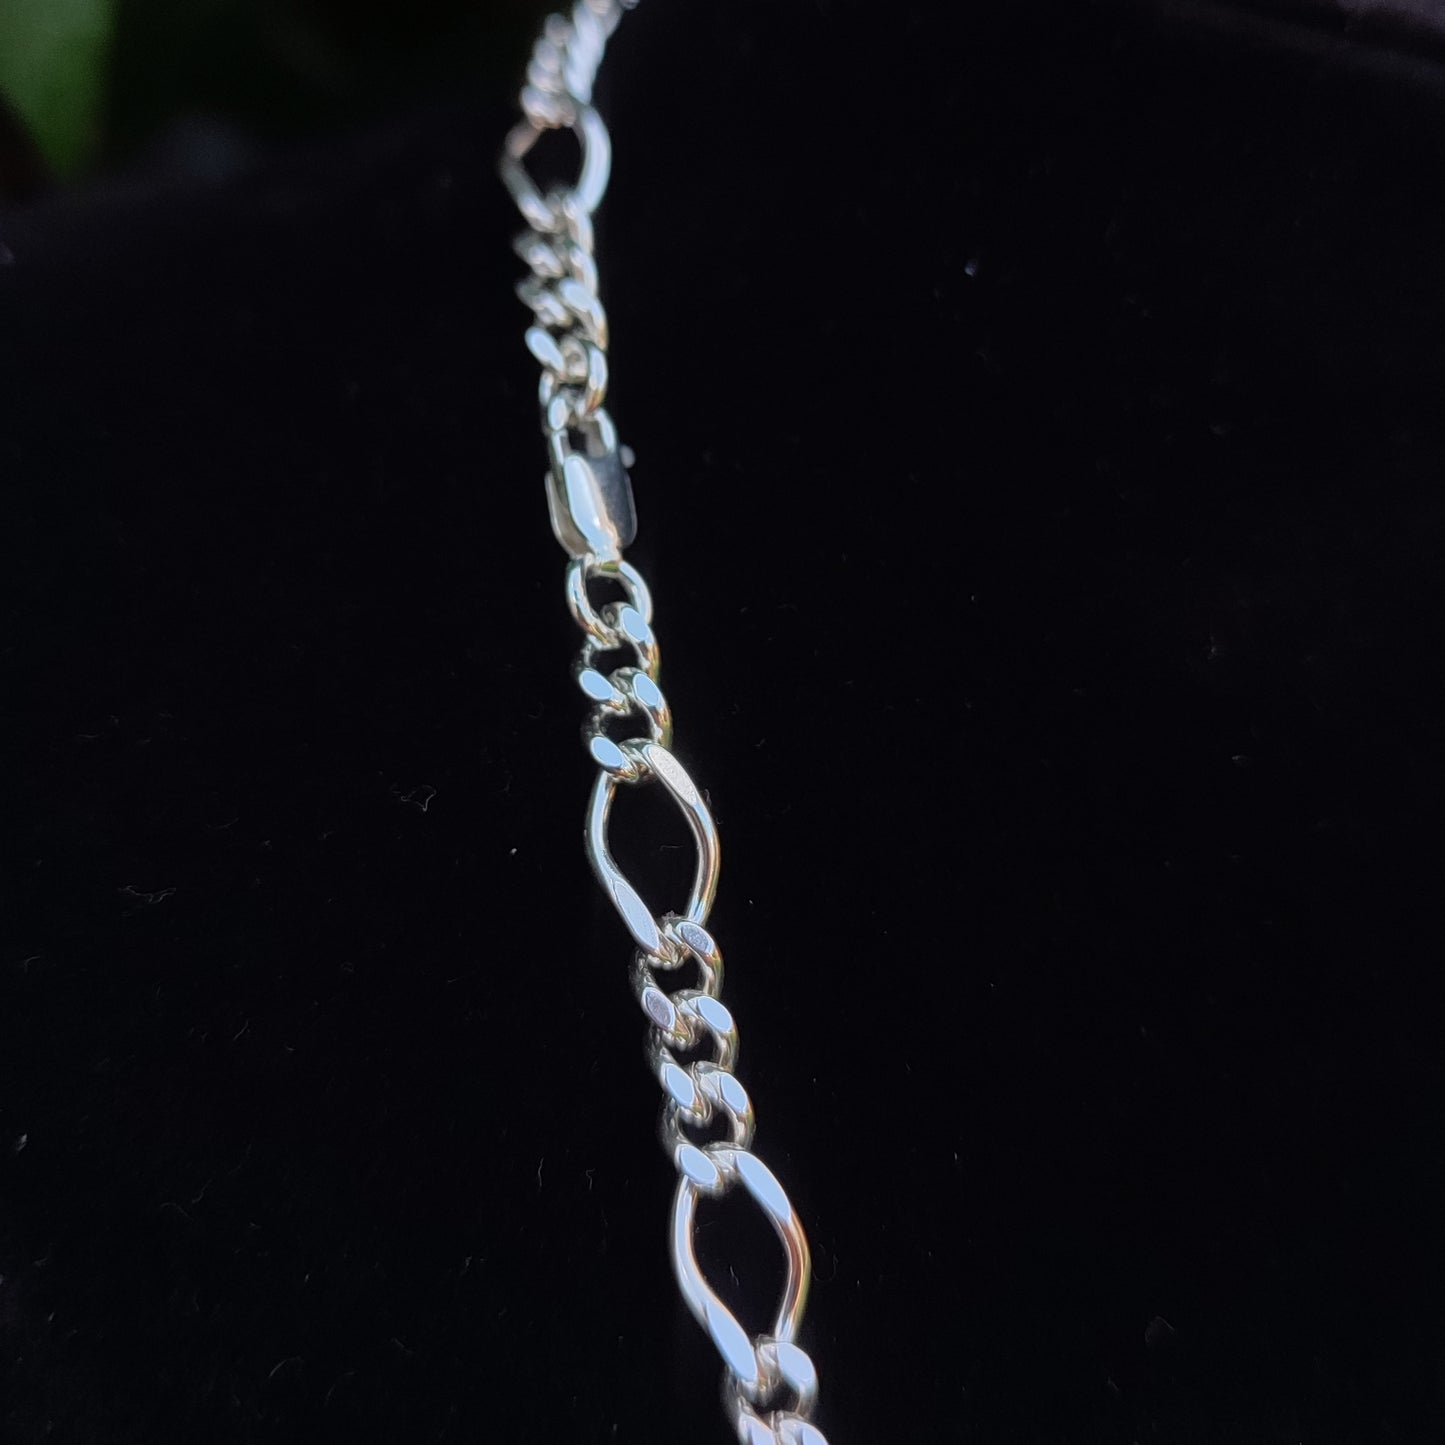 Figaro Chain Necklace - Sterling Silver